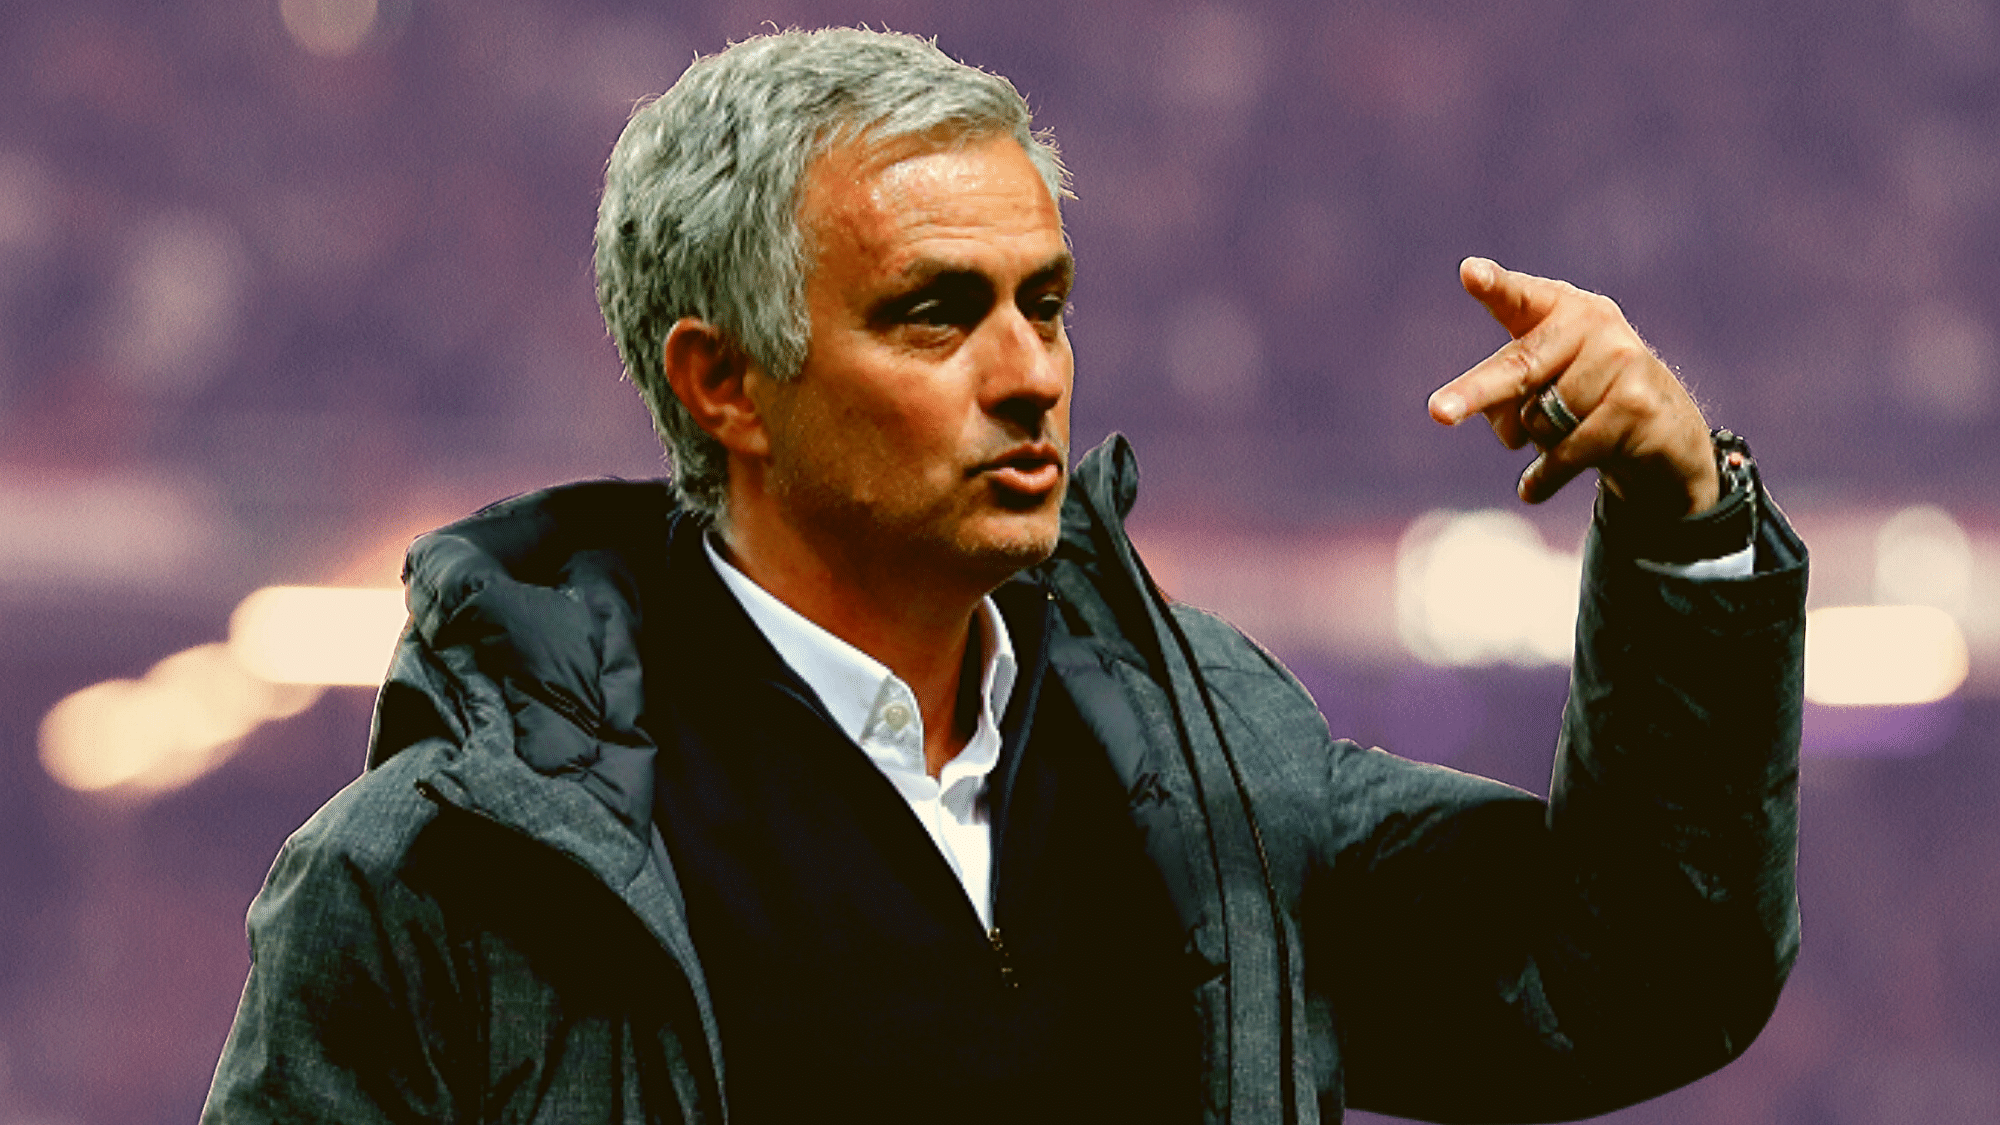 Jose Mourinho returns to Premier League after his Manchester United reign ended late last year.